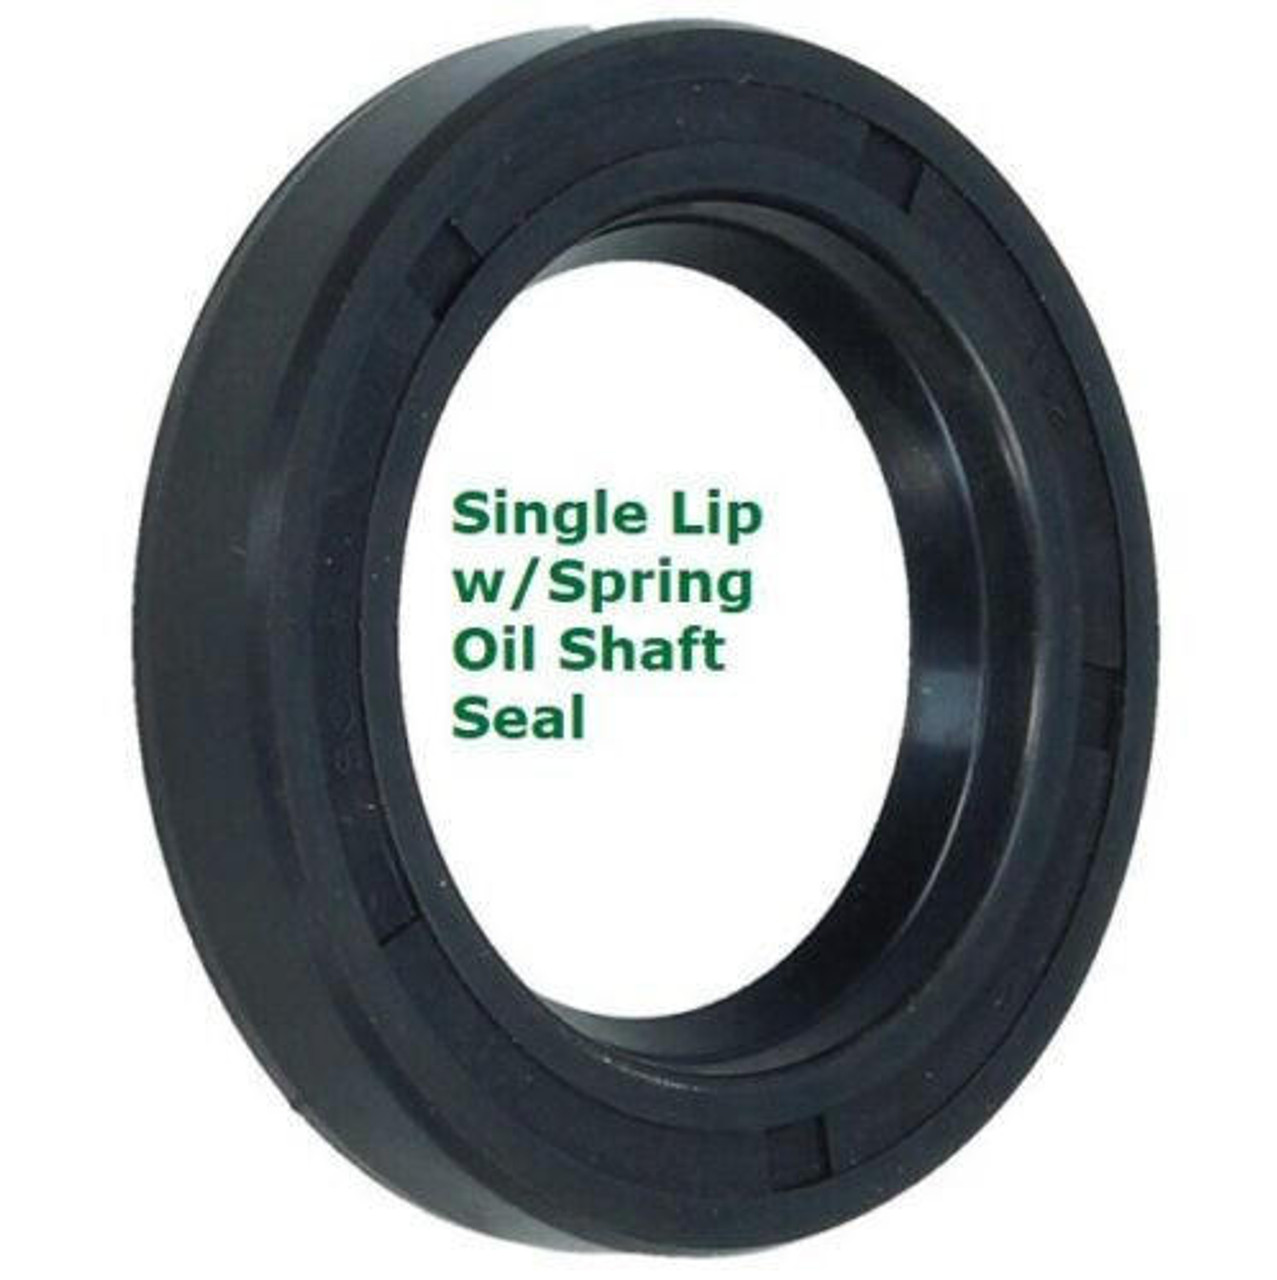 Metric Oil Shaft Seal 68 x 85 x 13mm   Price for 1 pc